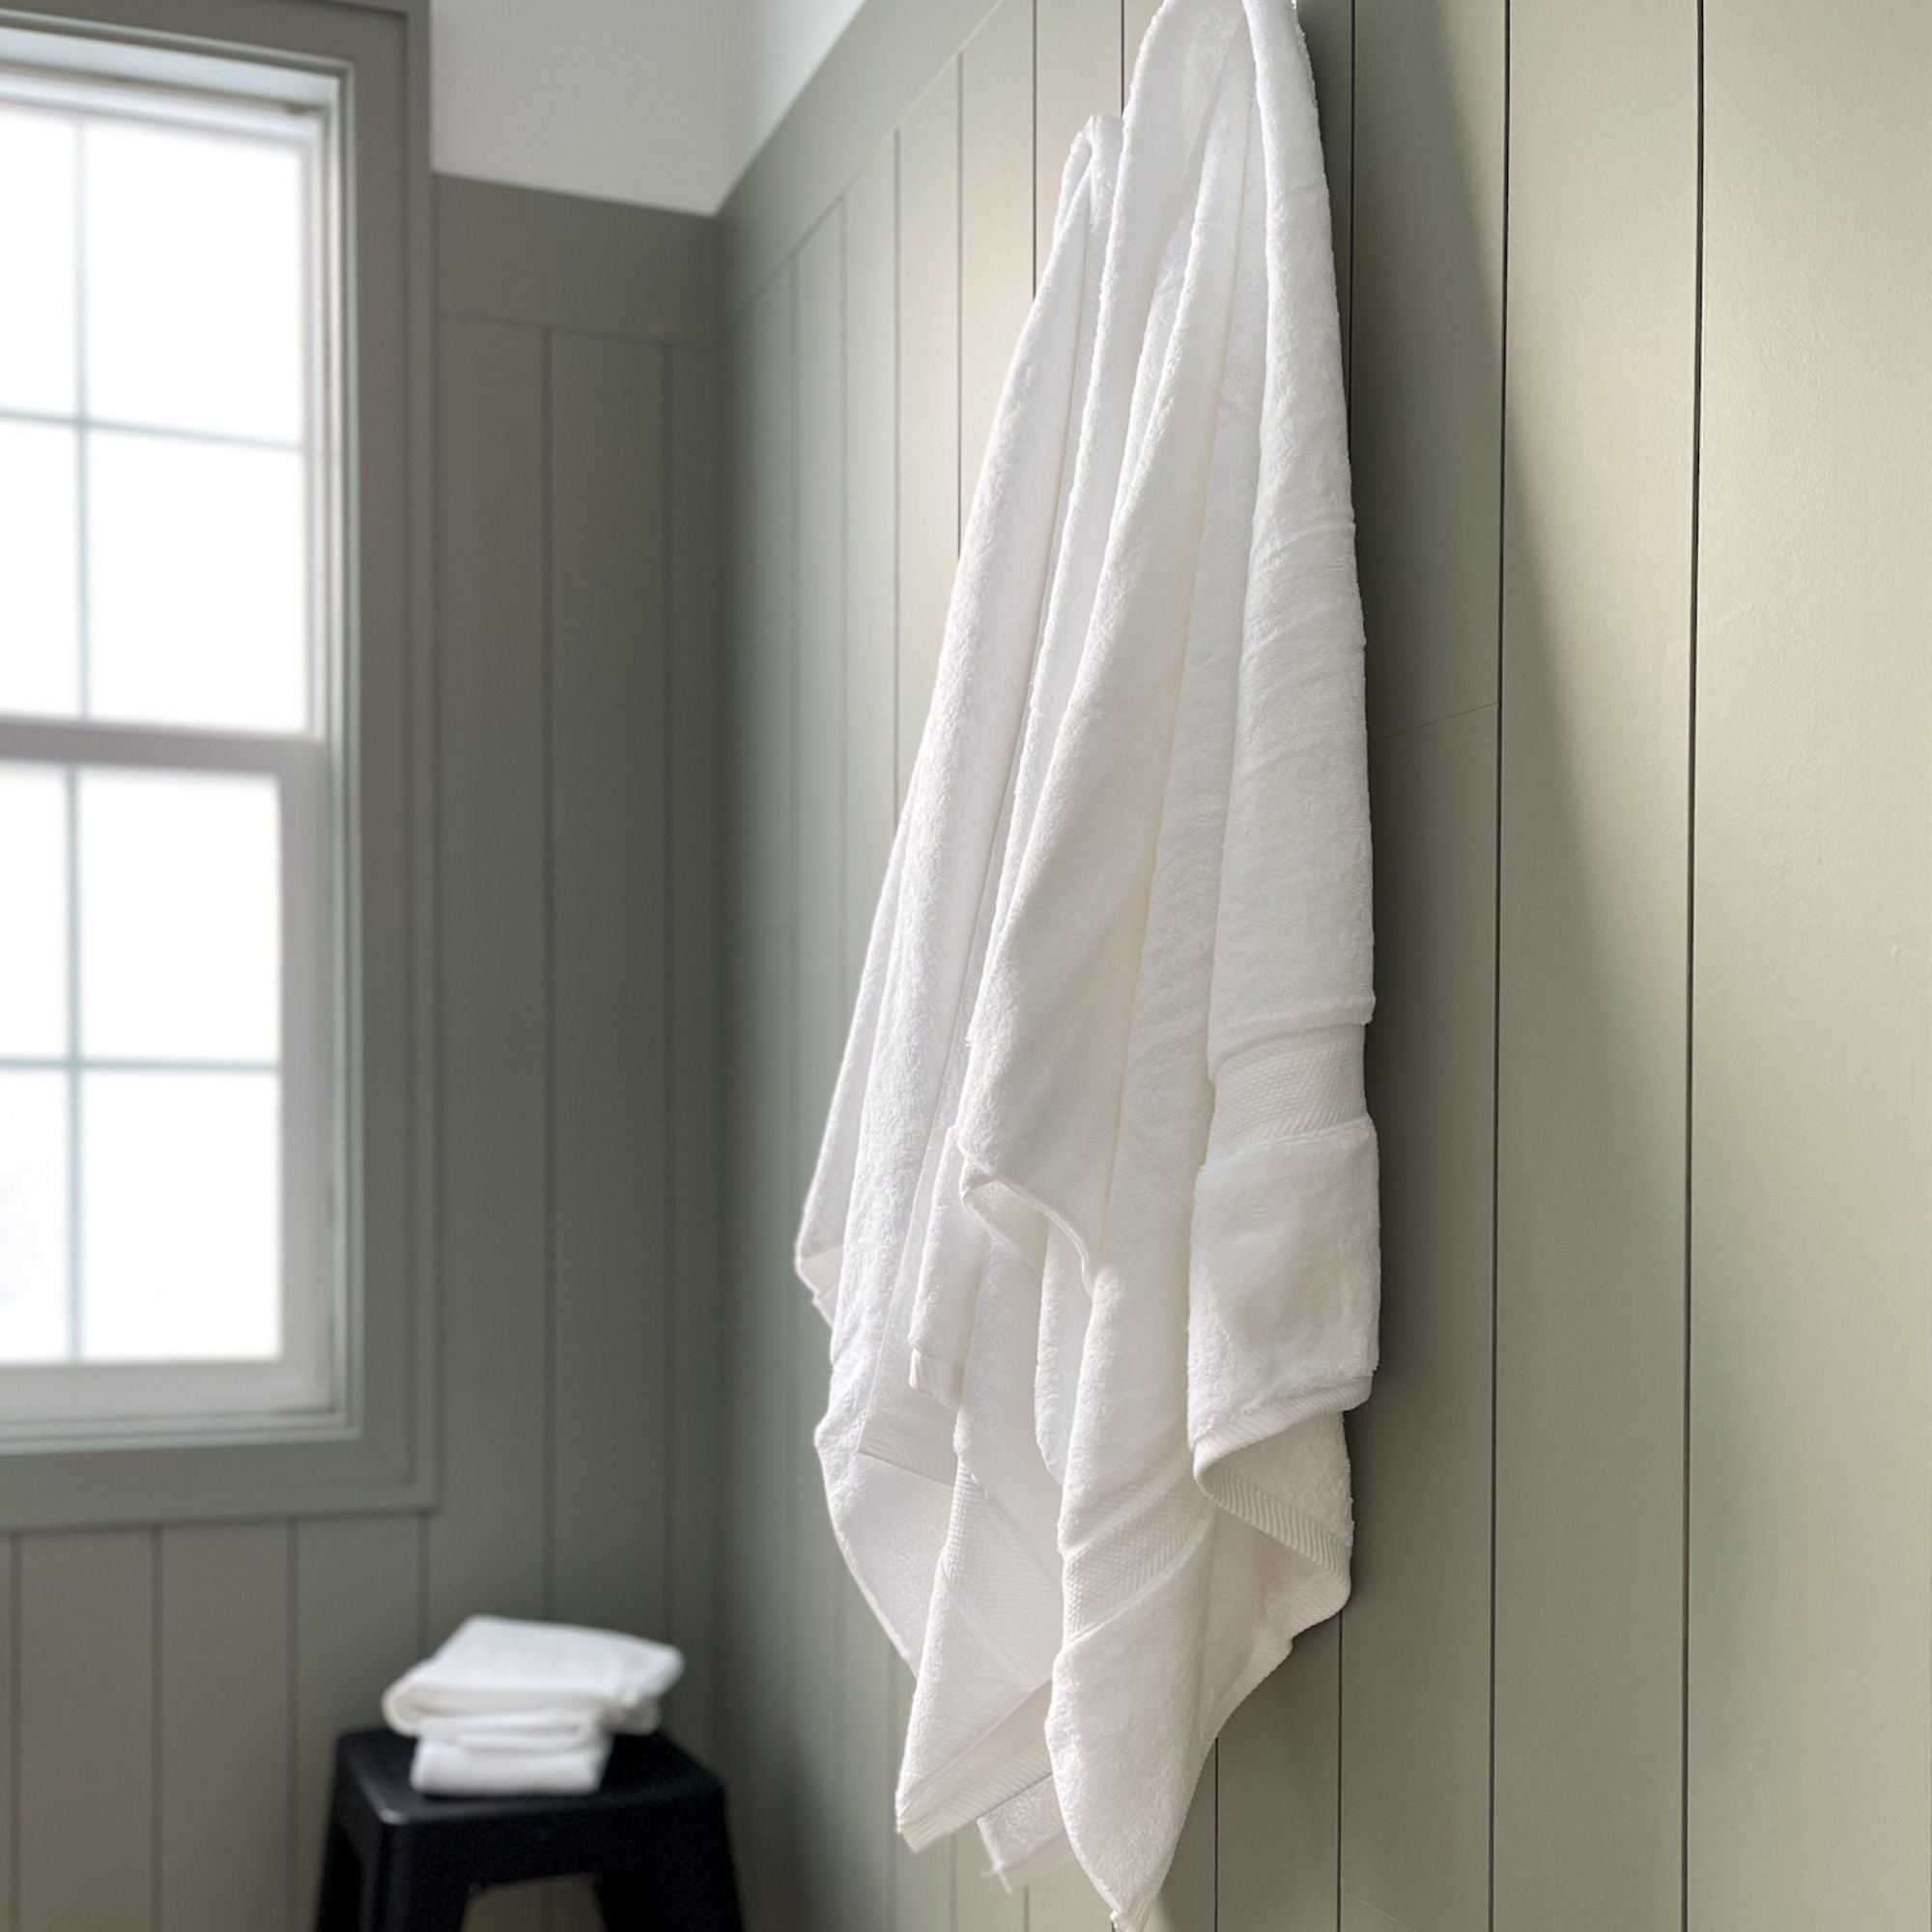 thick cotton towels hanging in the bathroom